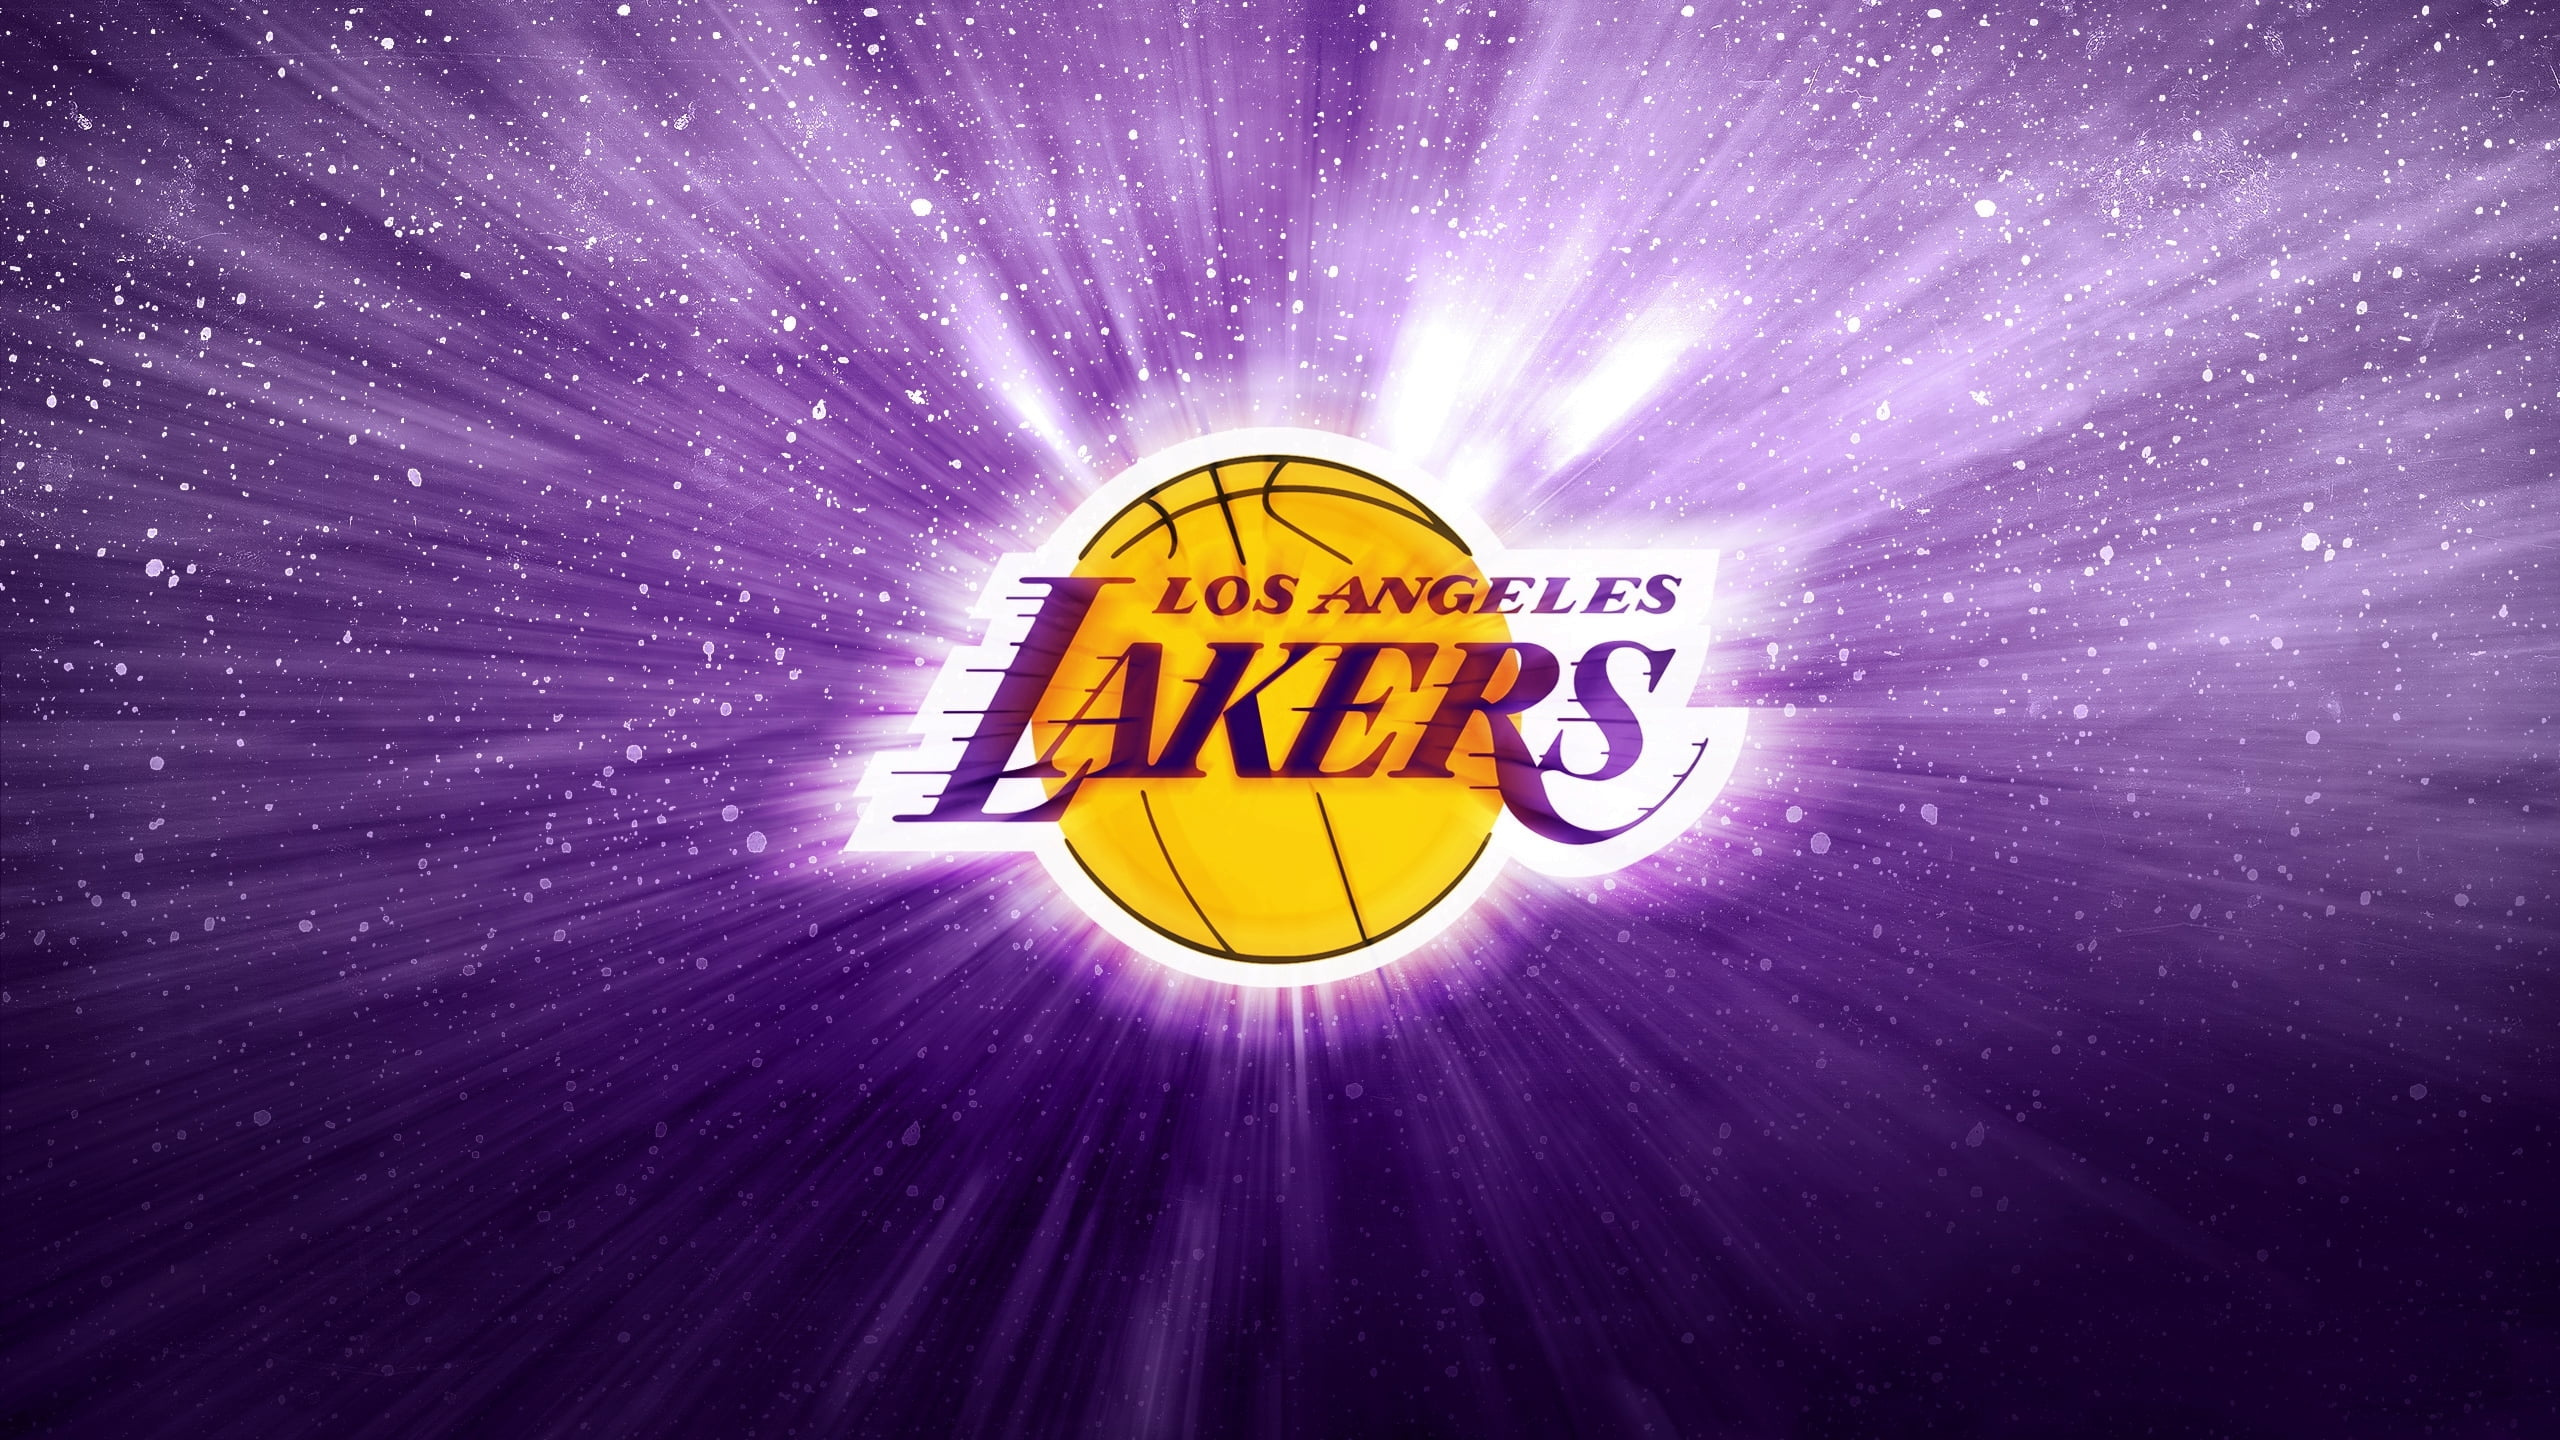 Los Angeles Lakers: The franchise began with the 1947 purchase of the Detroit Gems of the NBL. 2560x1440 HD Background.